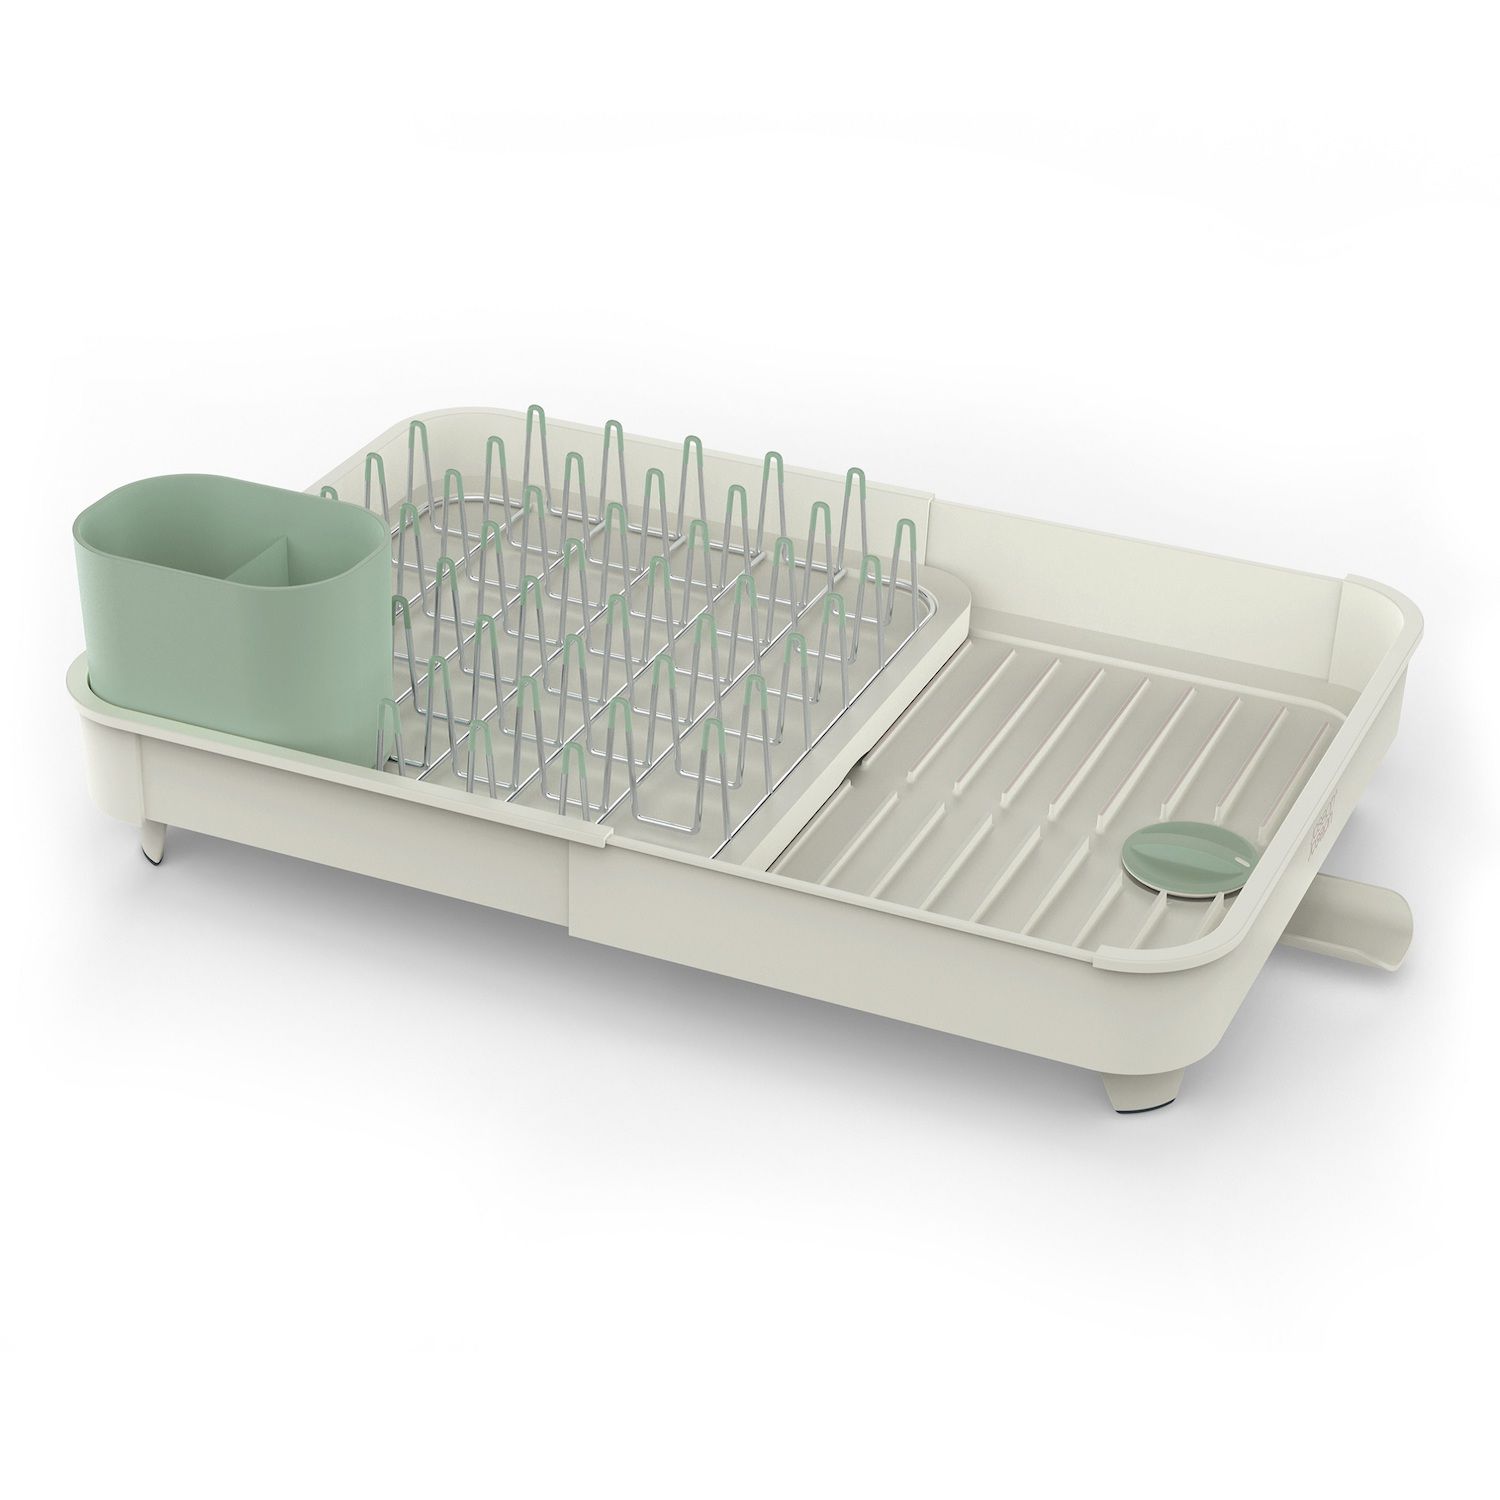 Shop Small Space Dish Rack online